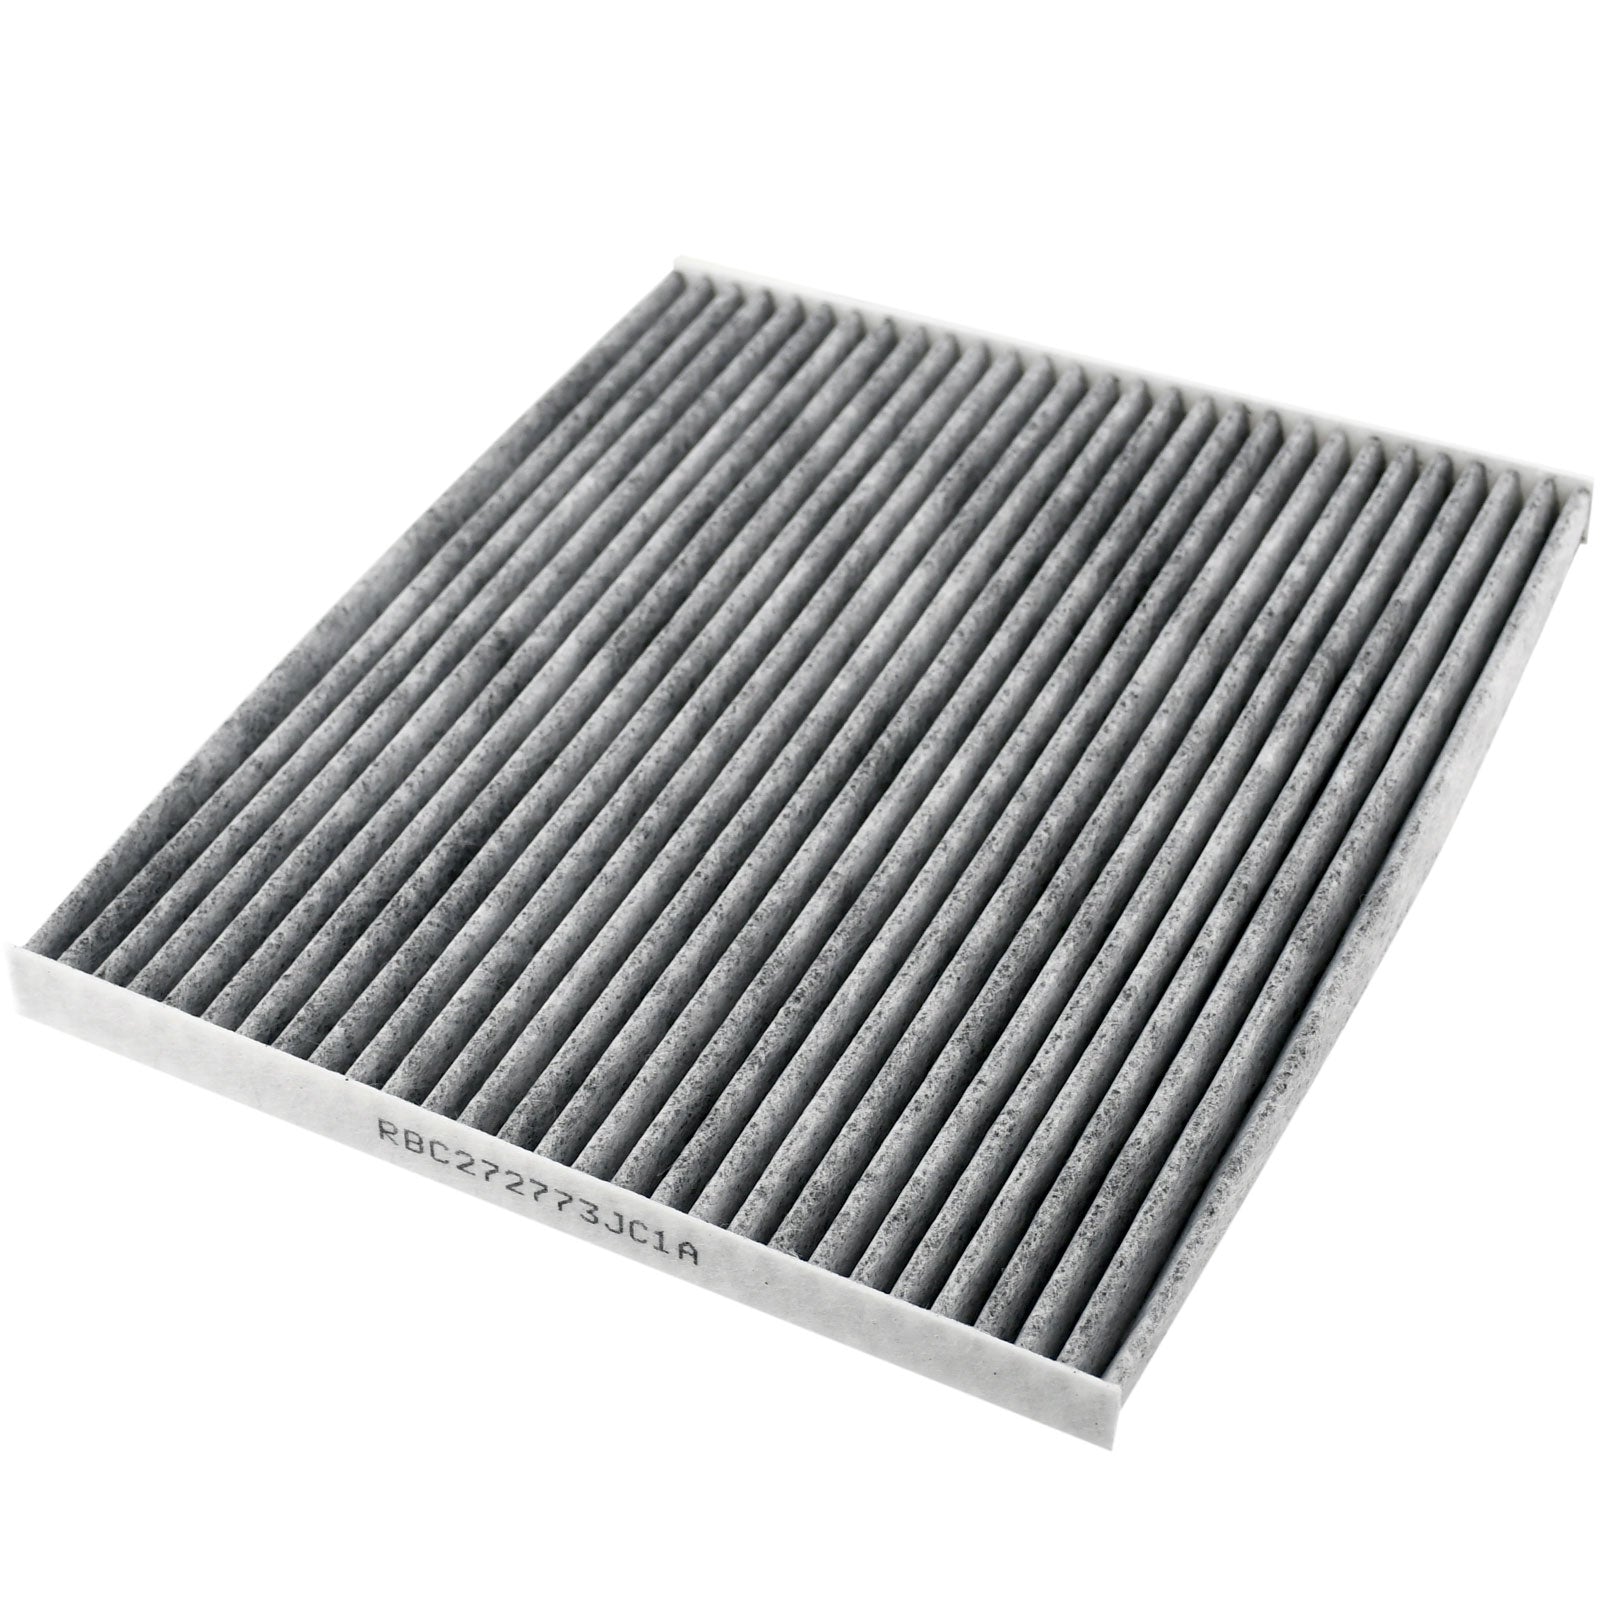 MotorbyMotor C272773JC1A (CF11776) Cabin Air Filter for Nissan Altima Pathfinder Murano, Infiniti JX35 QX60 Premium Air Filter, 244mm x 282mm x 20mm Car Air Filter MotorbyMotor